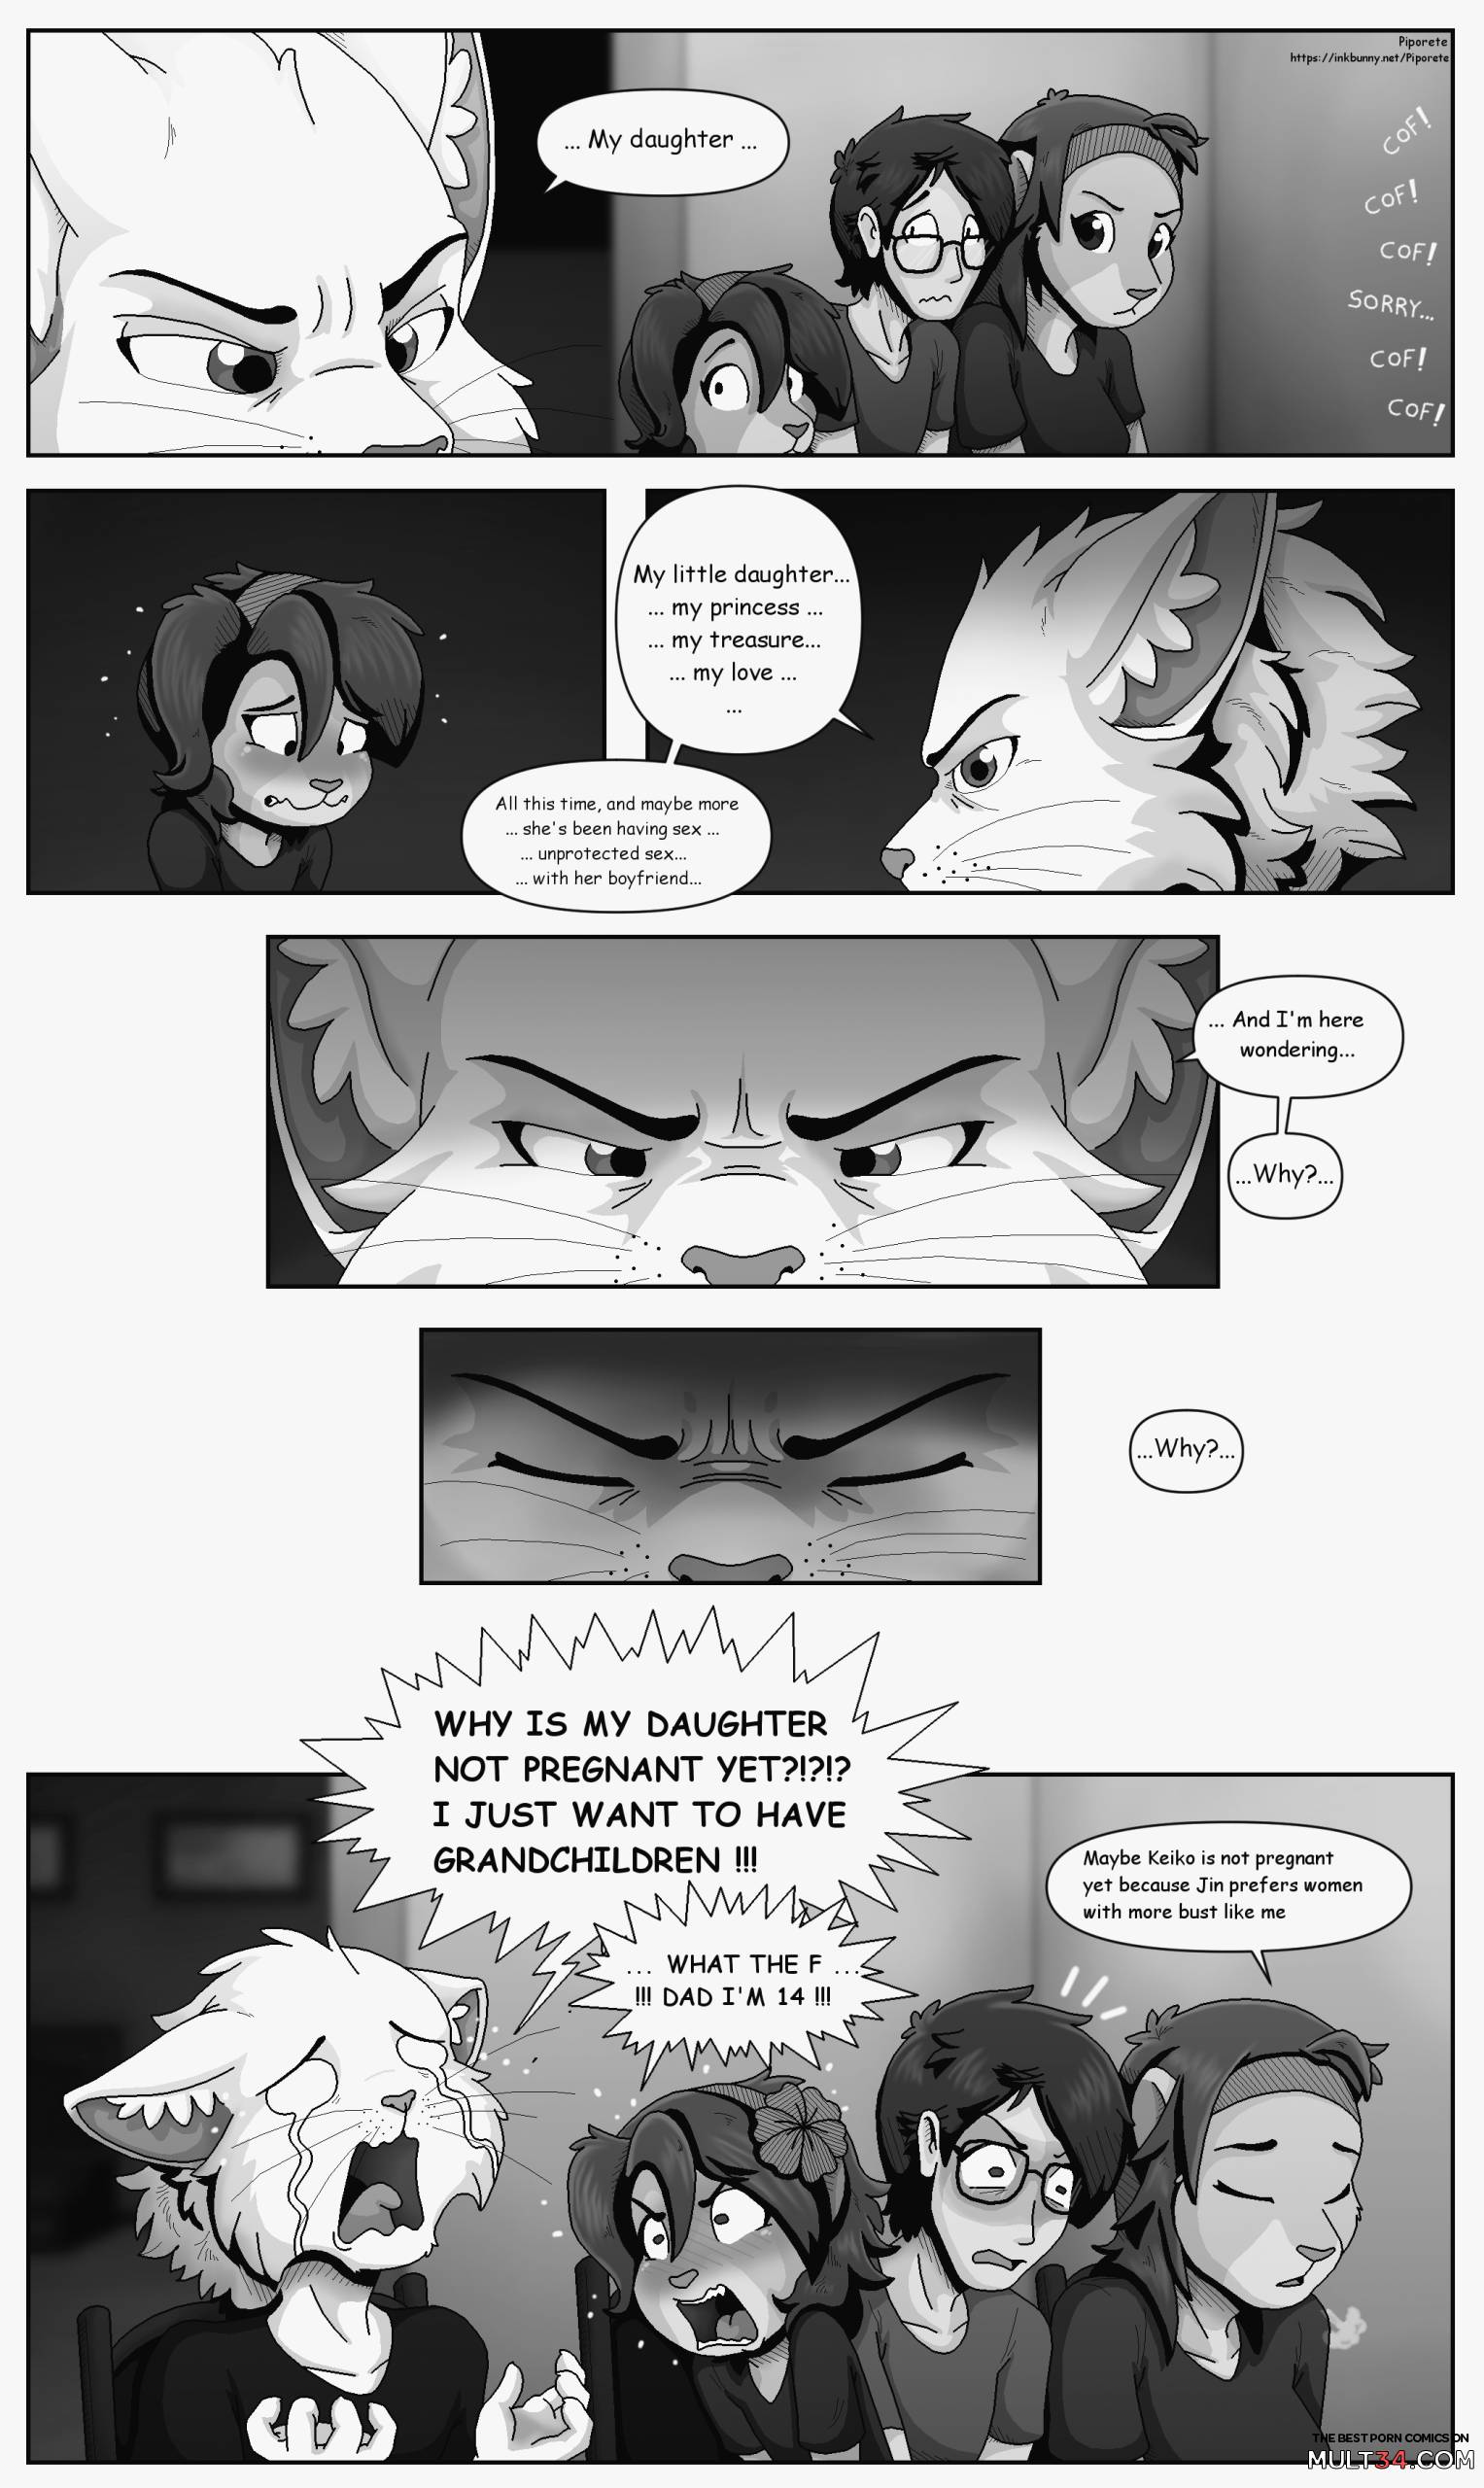 Keiko and Jin - Chapter 1 - 3 page 41